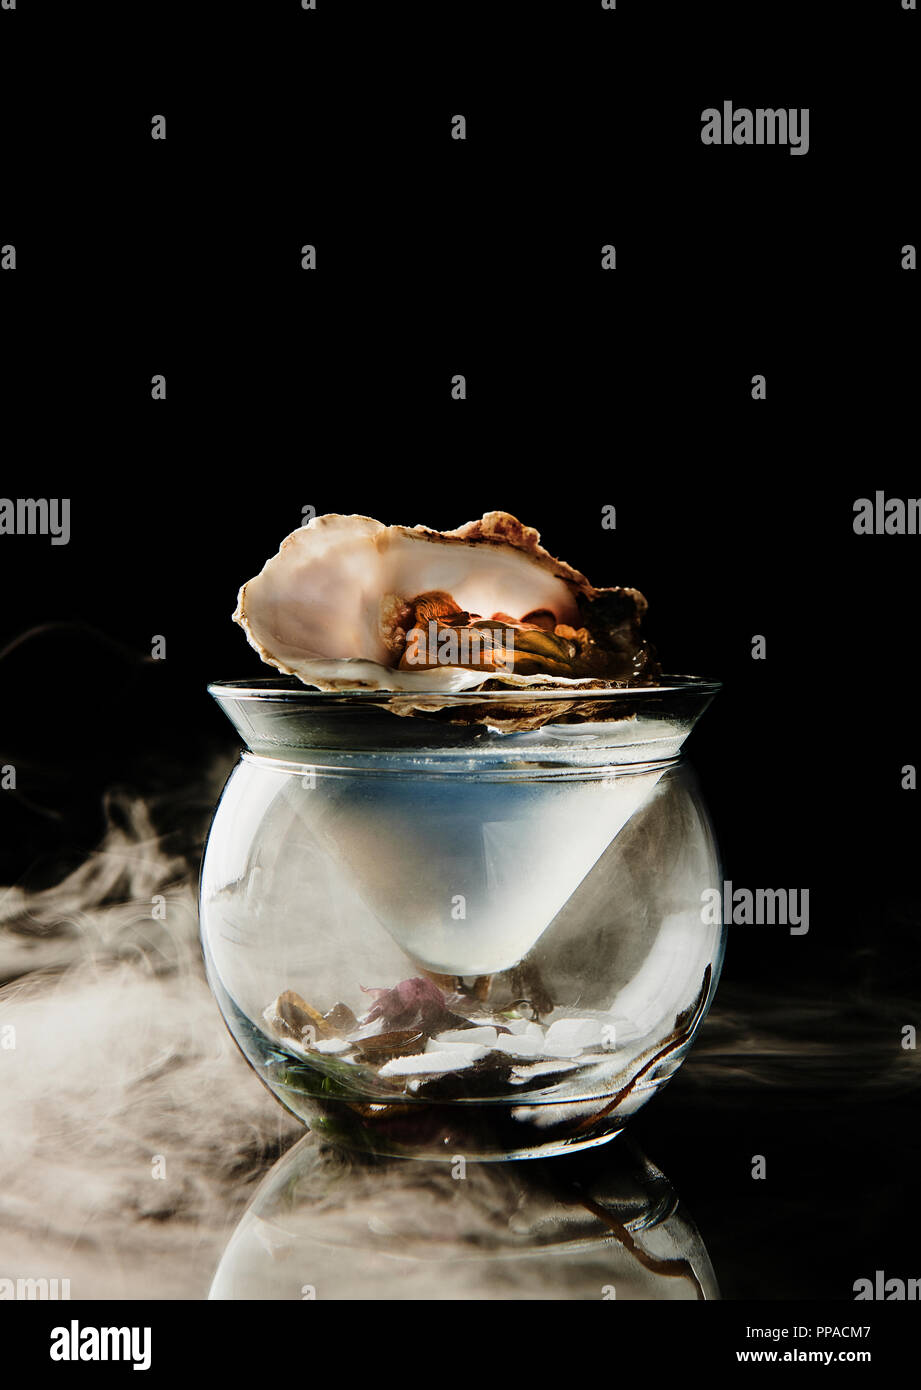 sophisticated classy mixologists Delicious tempting Cocktail on dark background with oyster and dry ice smoke Stock Photo